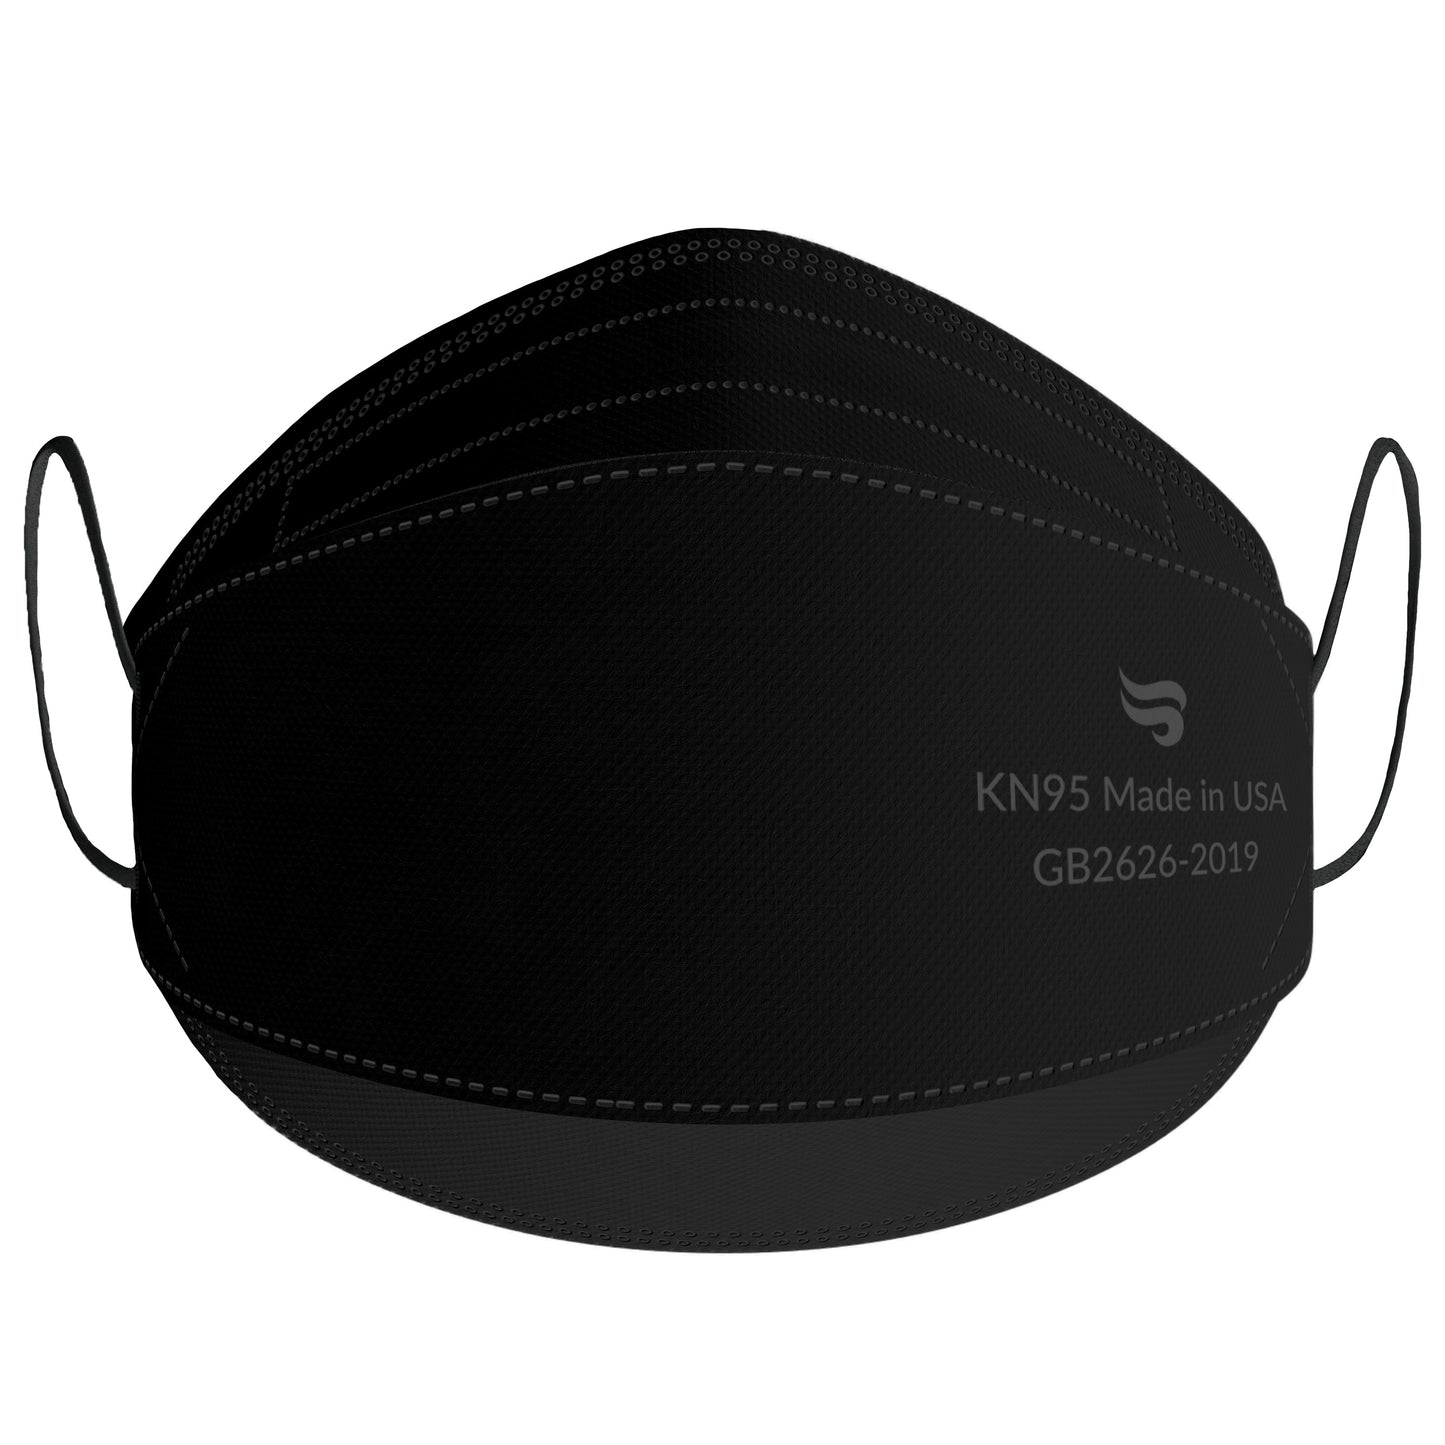 Breatheze by Sanctuary KN95 Face Masks Made in USA - 3D Style - Black 200-pack